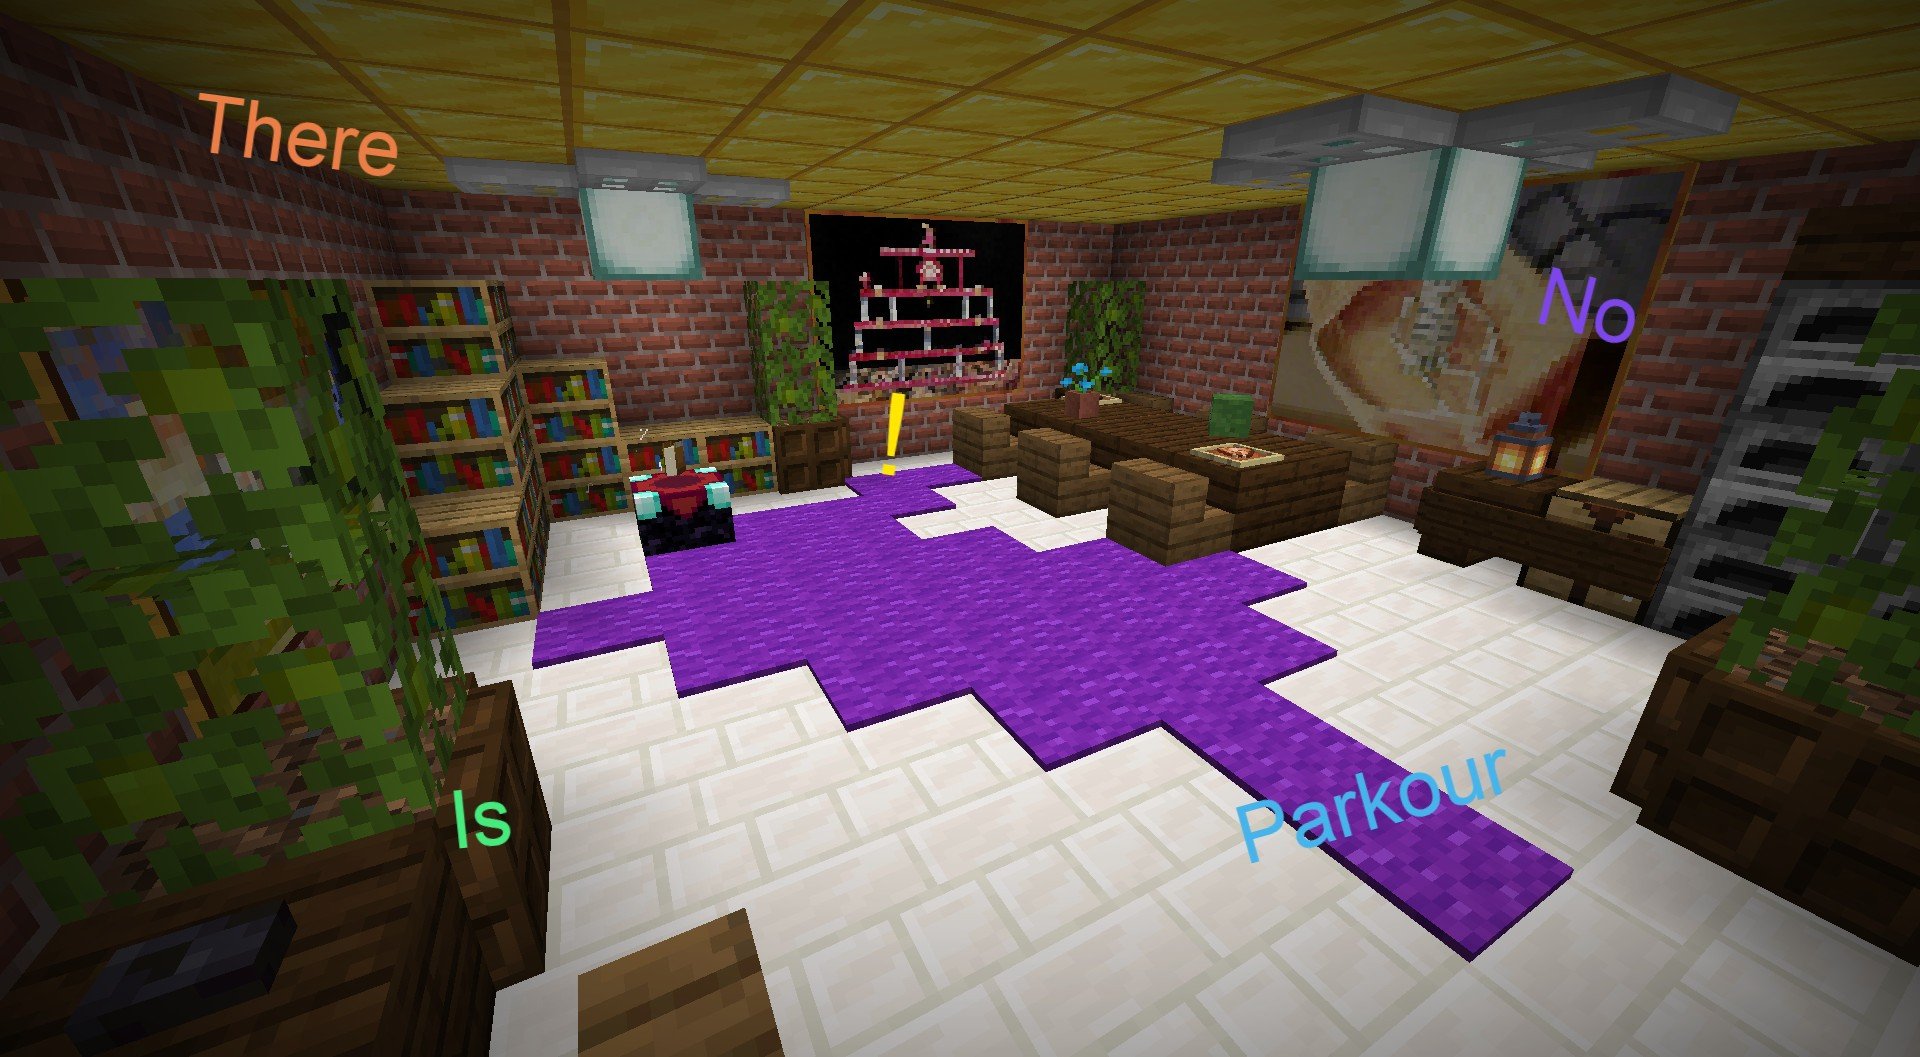 Unduh There Is No Parkour untuk Minecraft 1.16